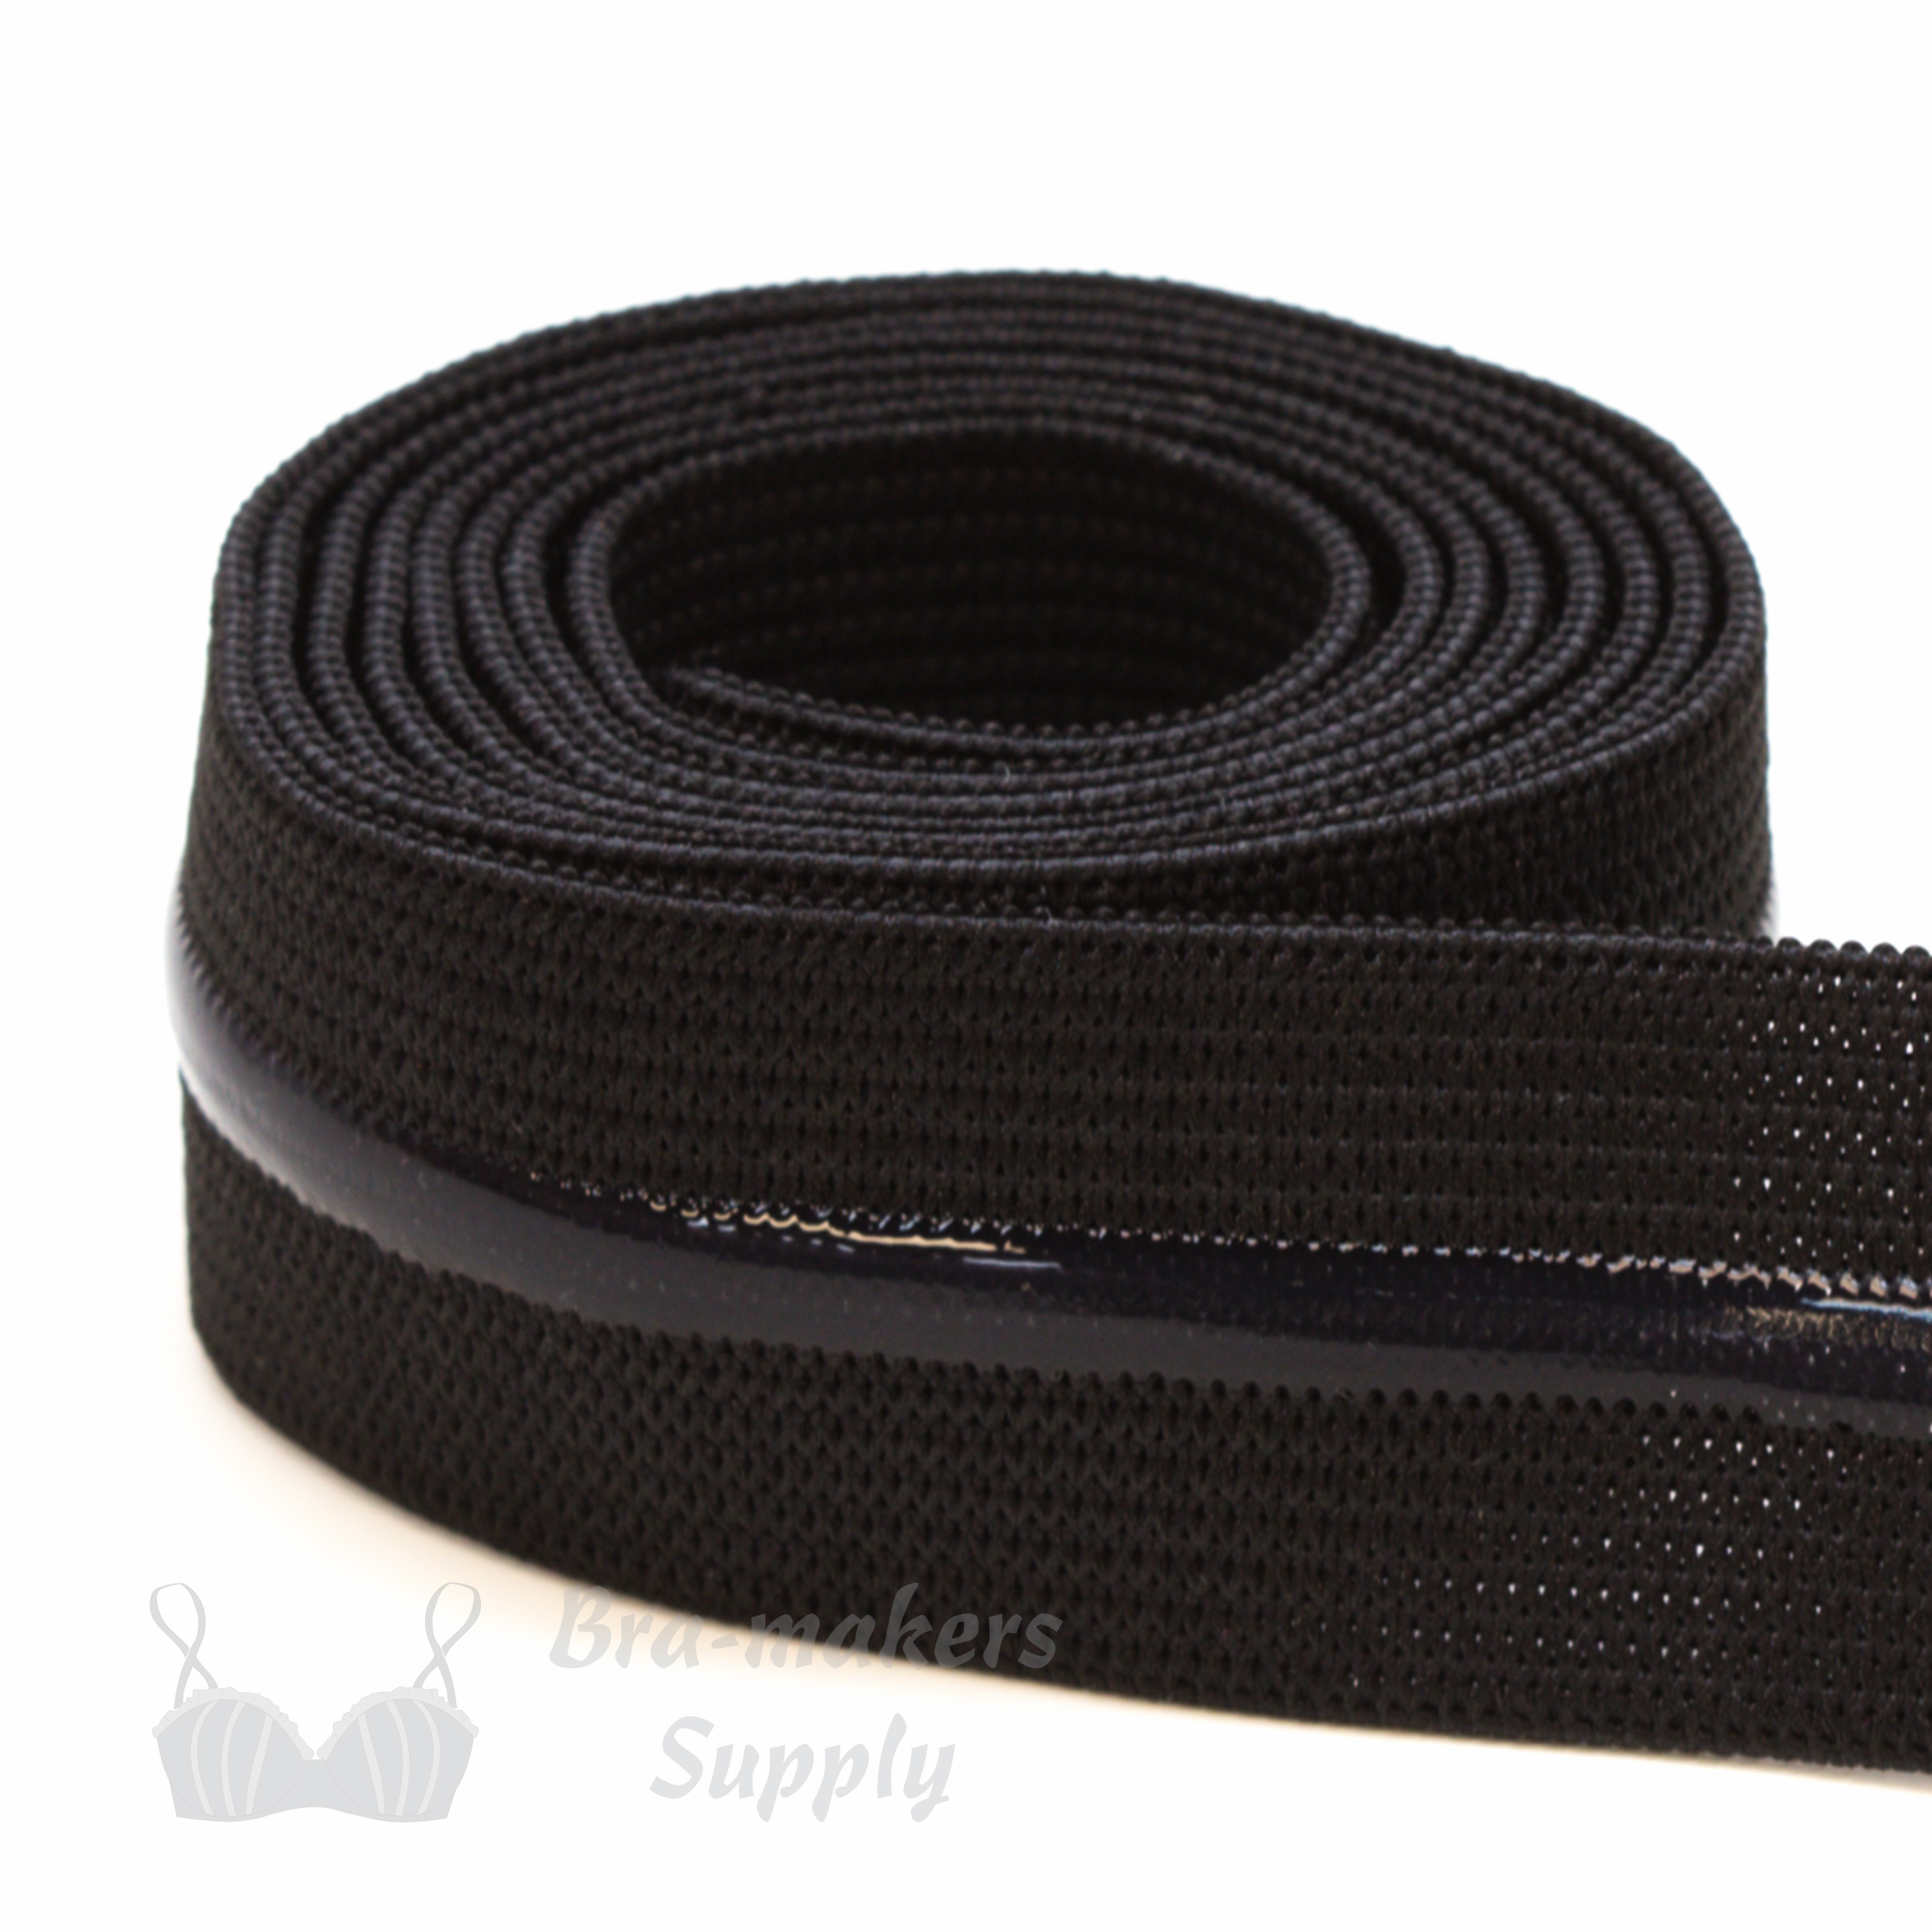 https://www.braandcorsetsupplies.com/wp-content/uploads/2016/10/one-inch-or-25-mm-silicone-gripper-elastic-EG-8-black-from-Bra-Makers-Supply-1-metre-roll-shown.jpg